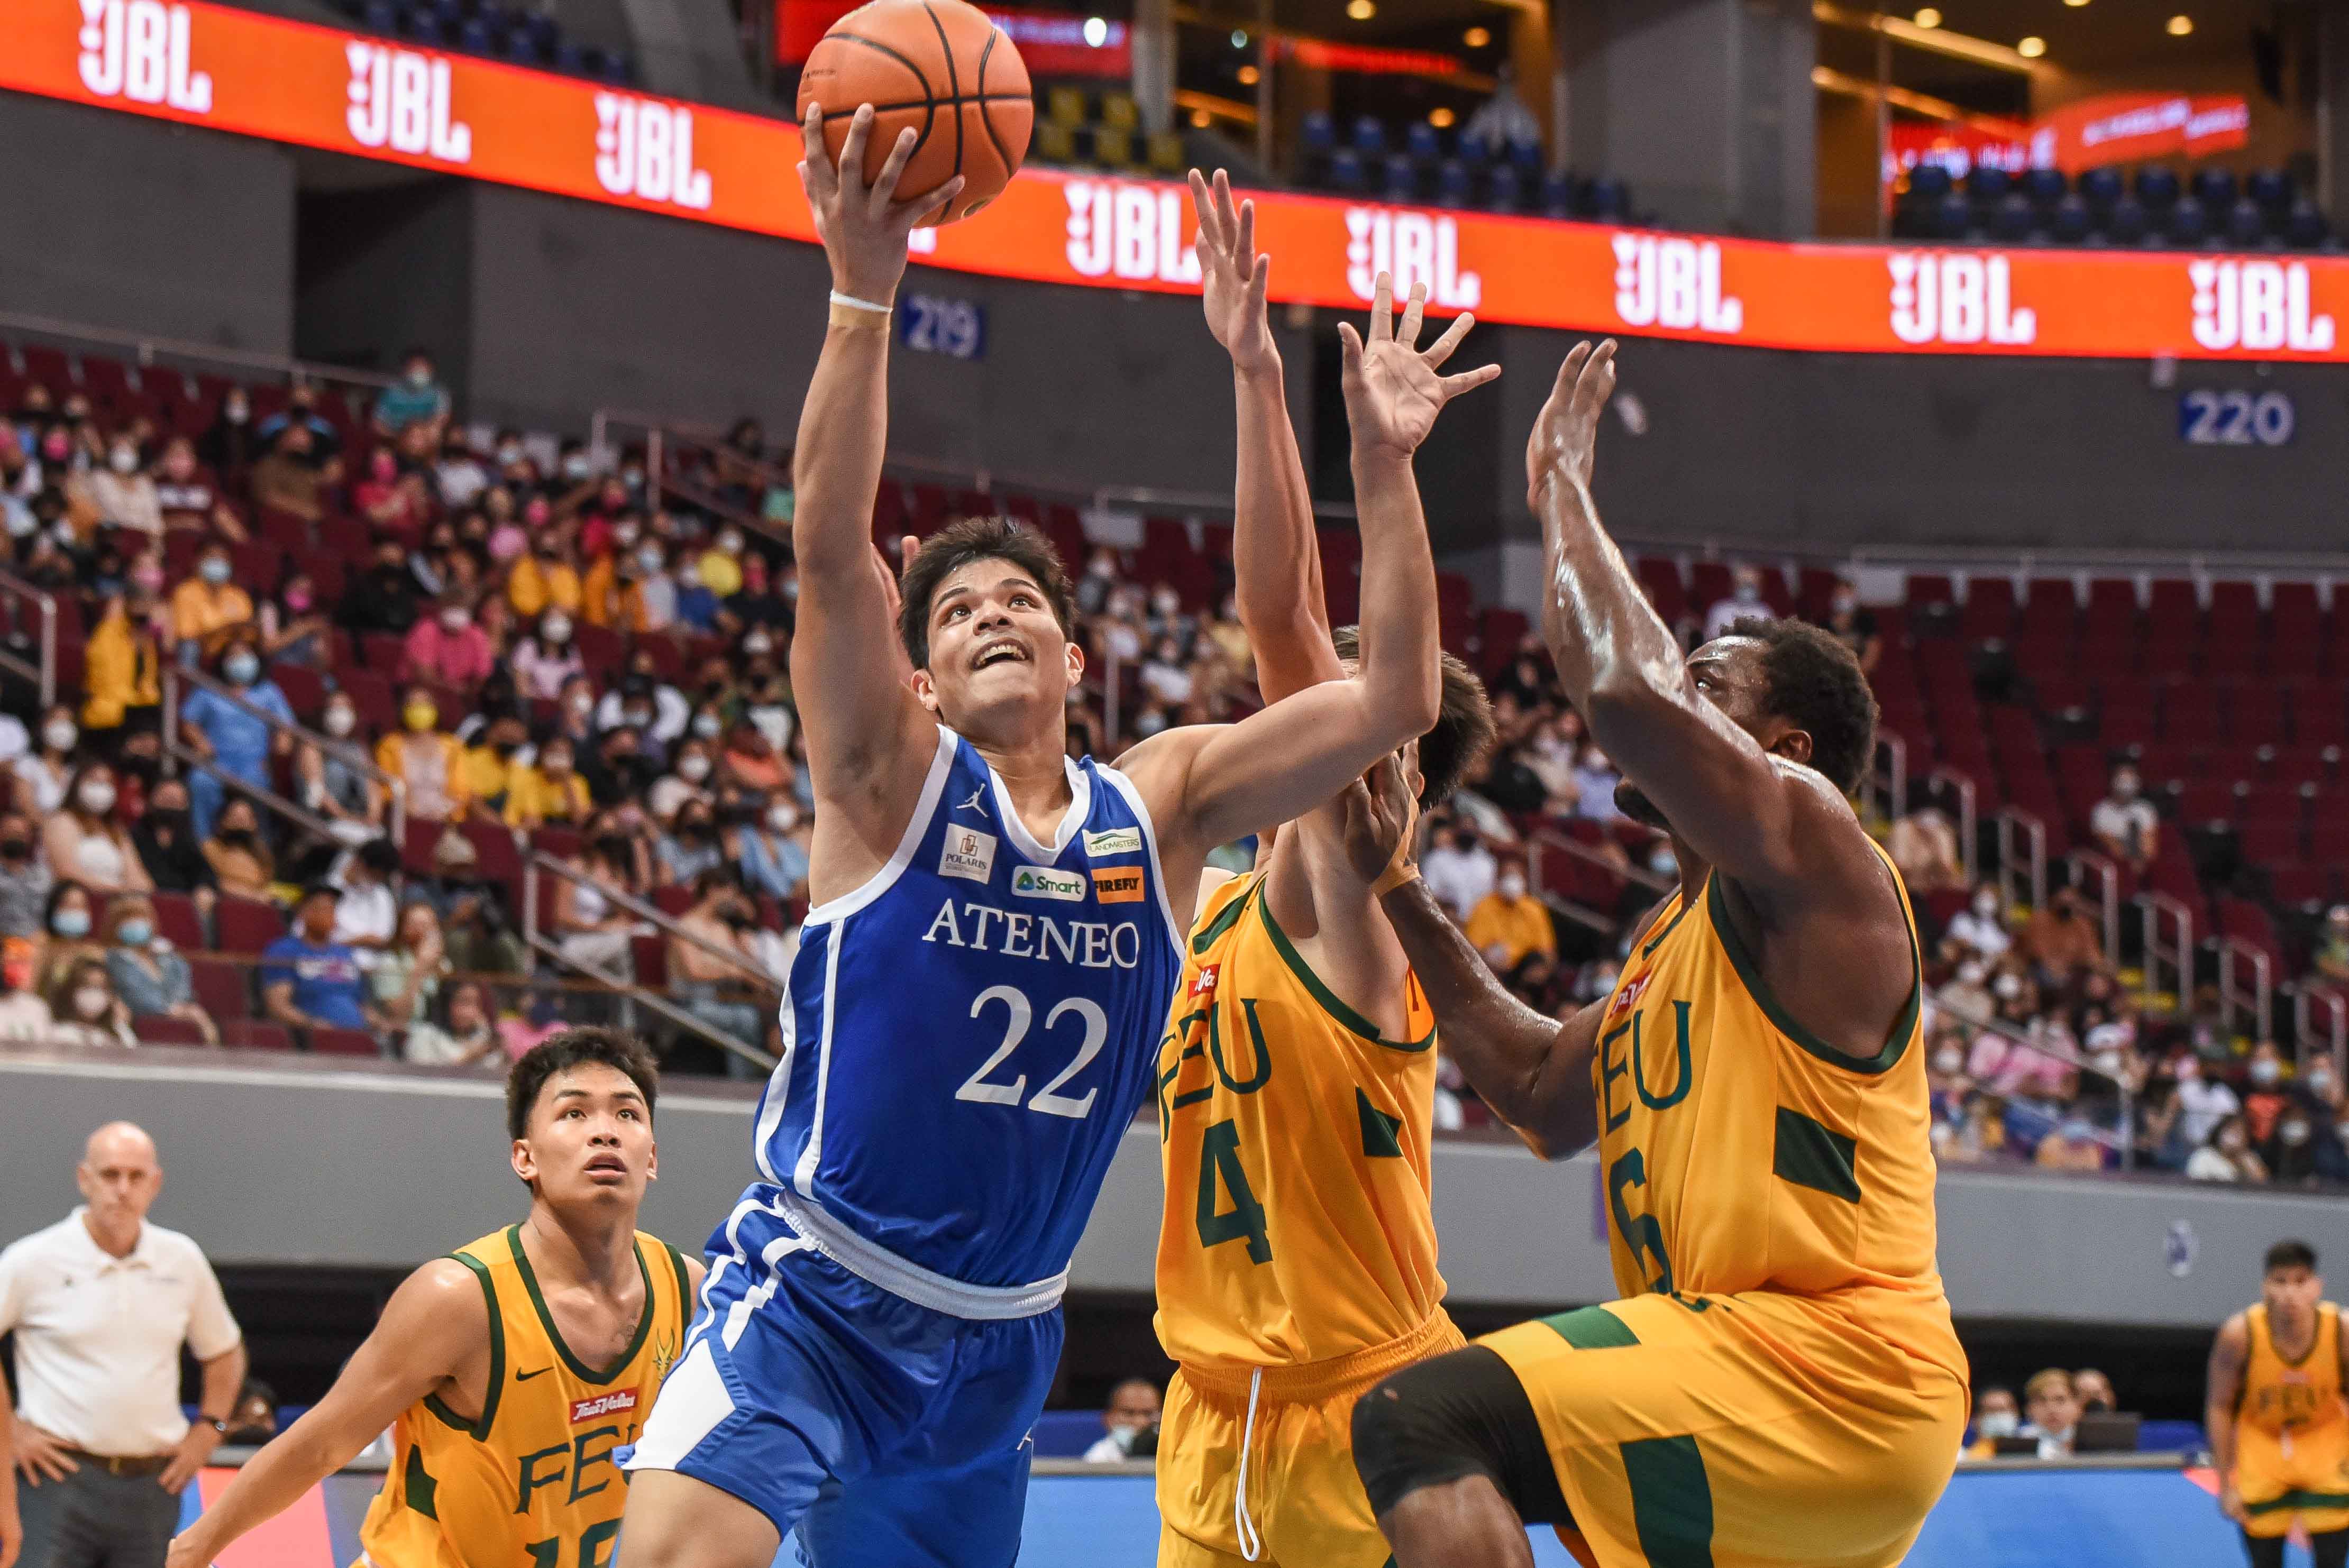 Ateneo downs FEU, moves one win away from sweep